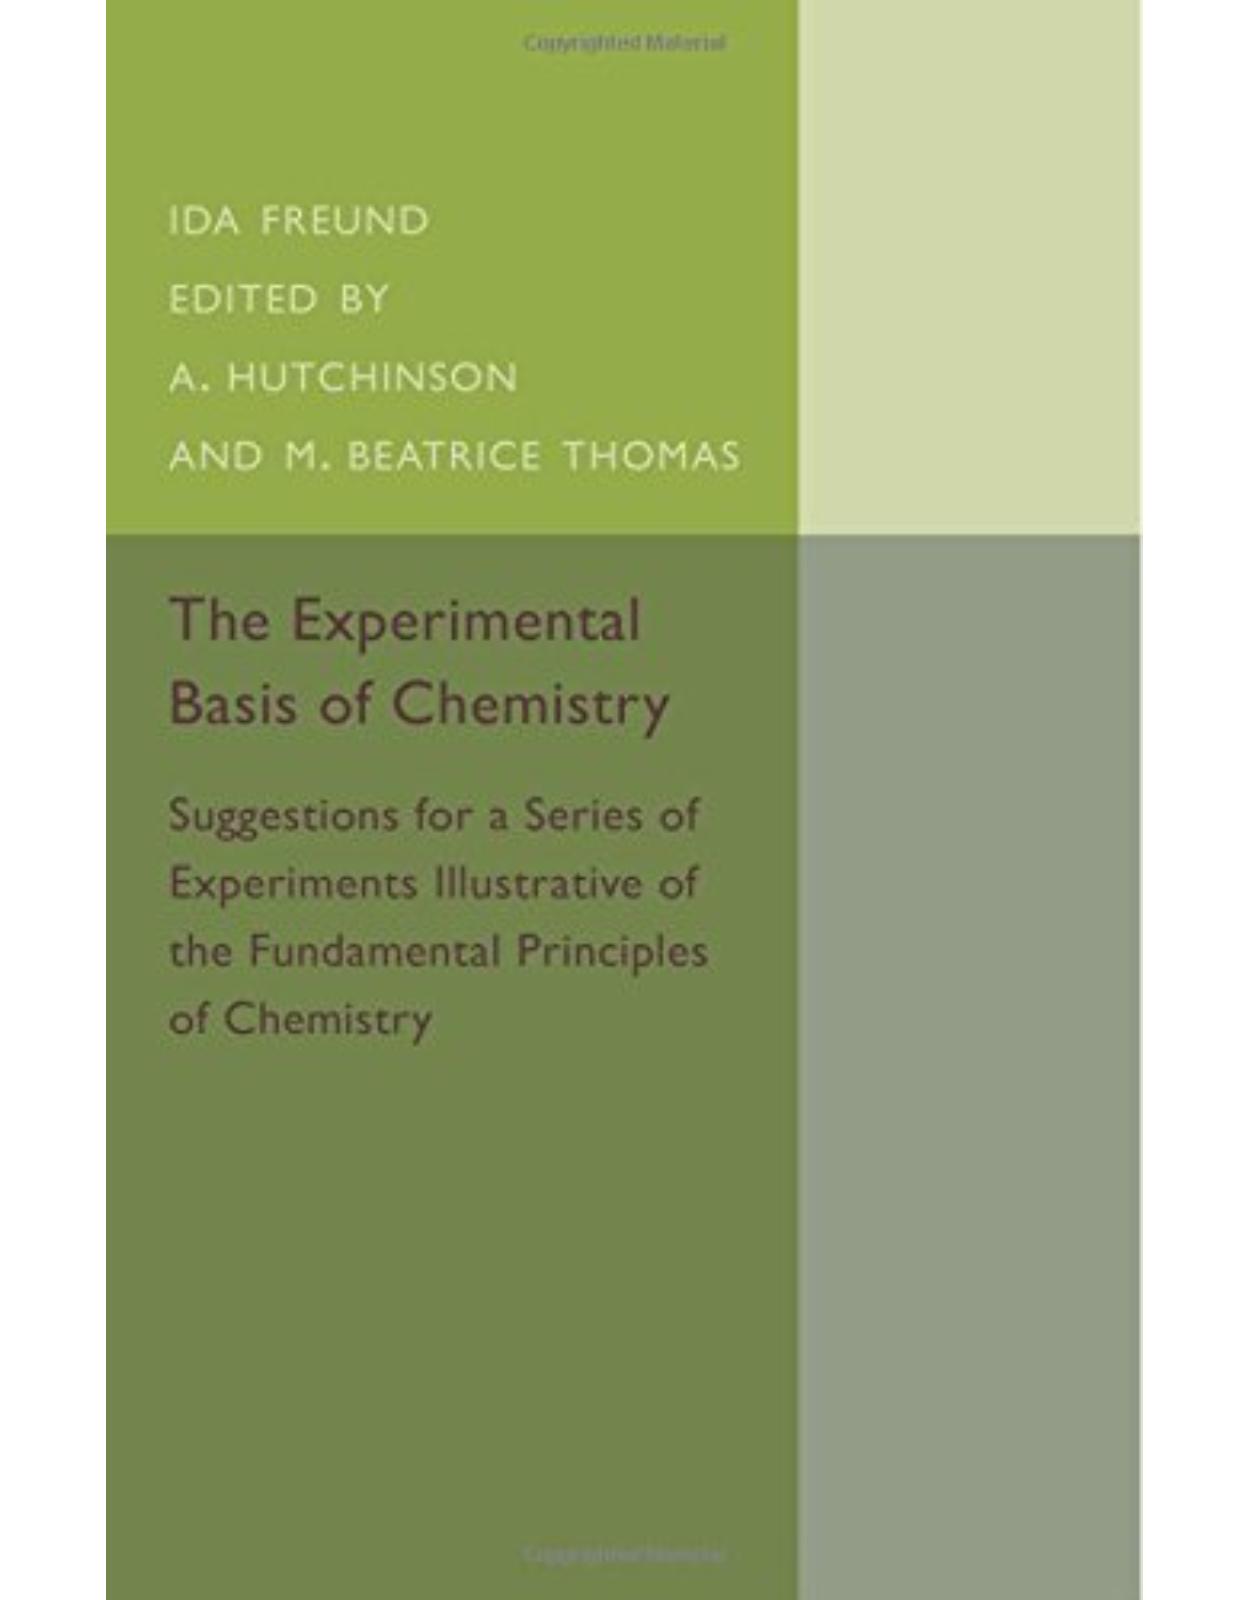 The Experimental Basis of Chemistry: Suggestions for a Series of Experiments Illustrative of the Fundamental Principles of Chemistry